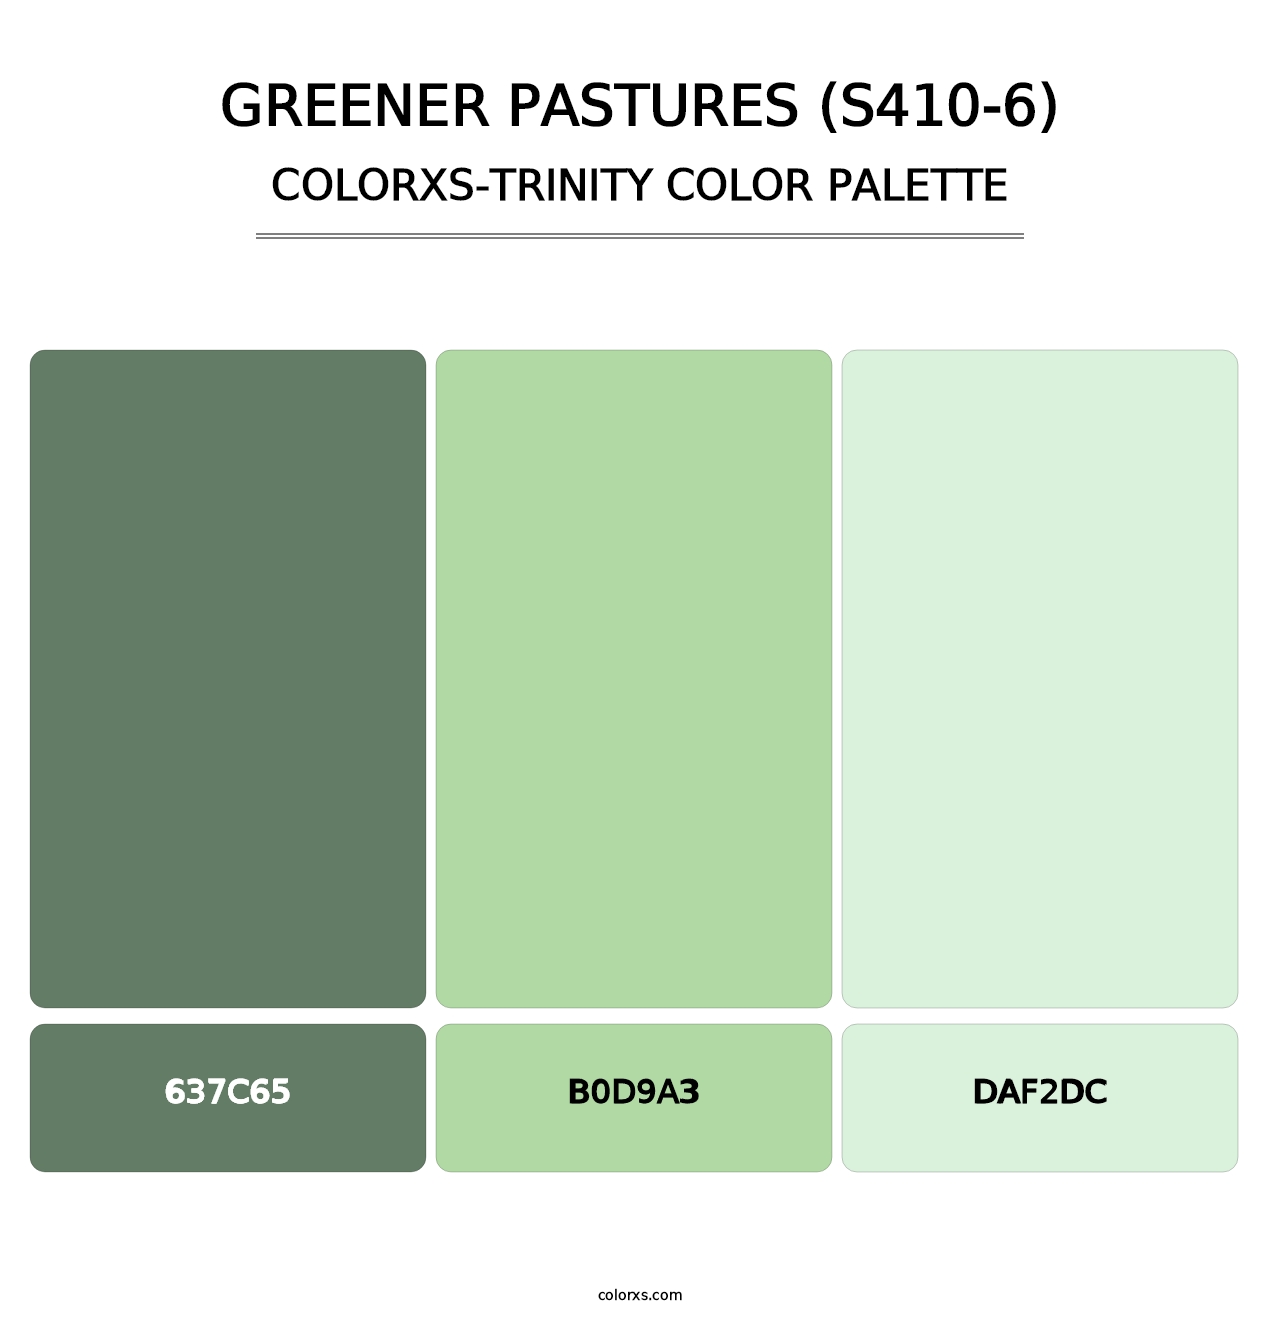 Greener Pastures (S410-6) - Colorxs Trinity Palette